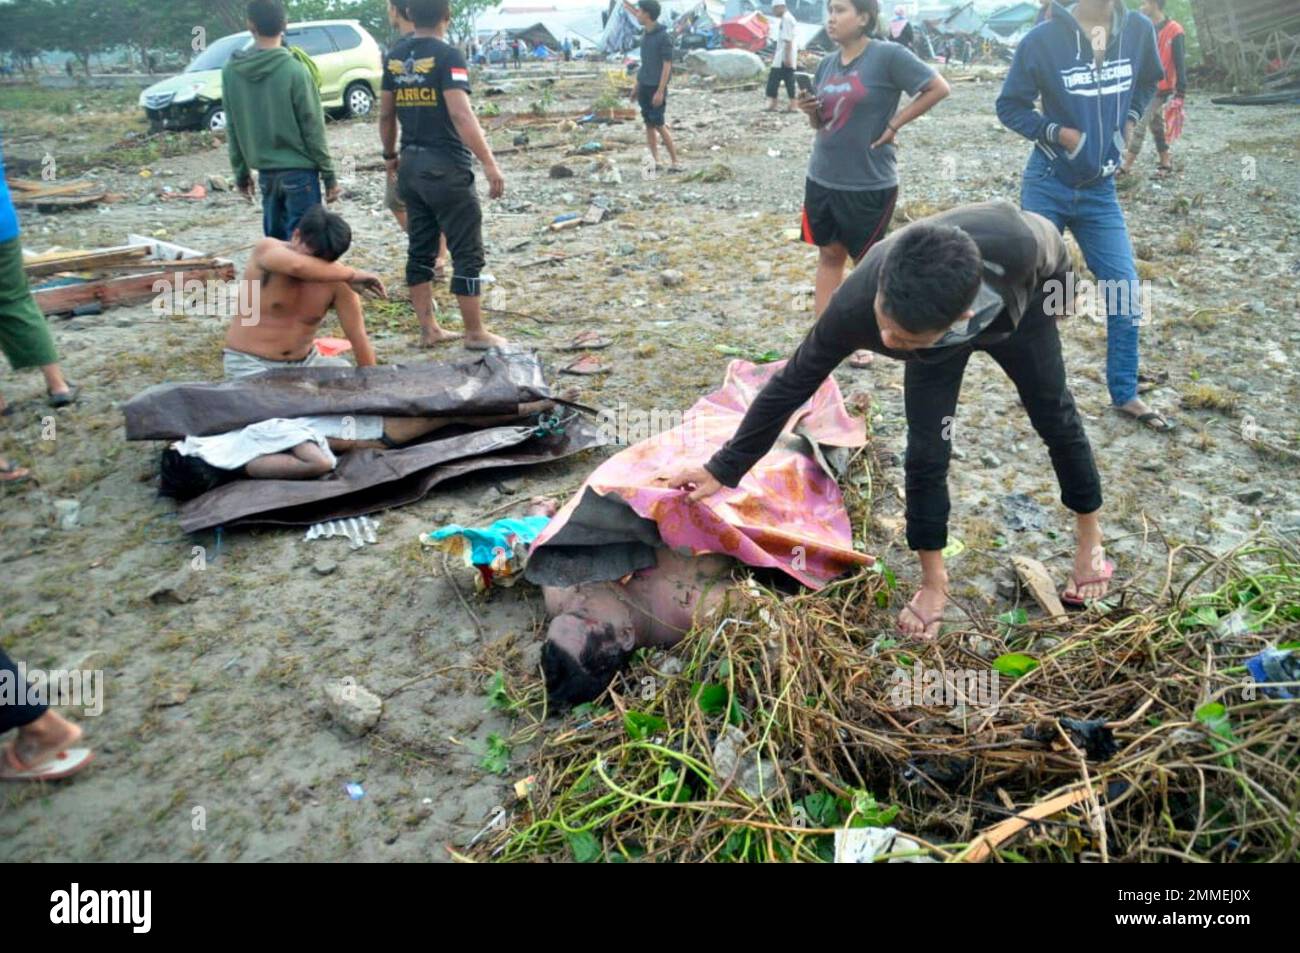 People check the bodies of tsunami victims as they try to find their loved  ones in Palu, Central Sulawesi, Indonesia, Saturday, Sept. 29, 2018. A  tsunami swept away buildings and killed large